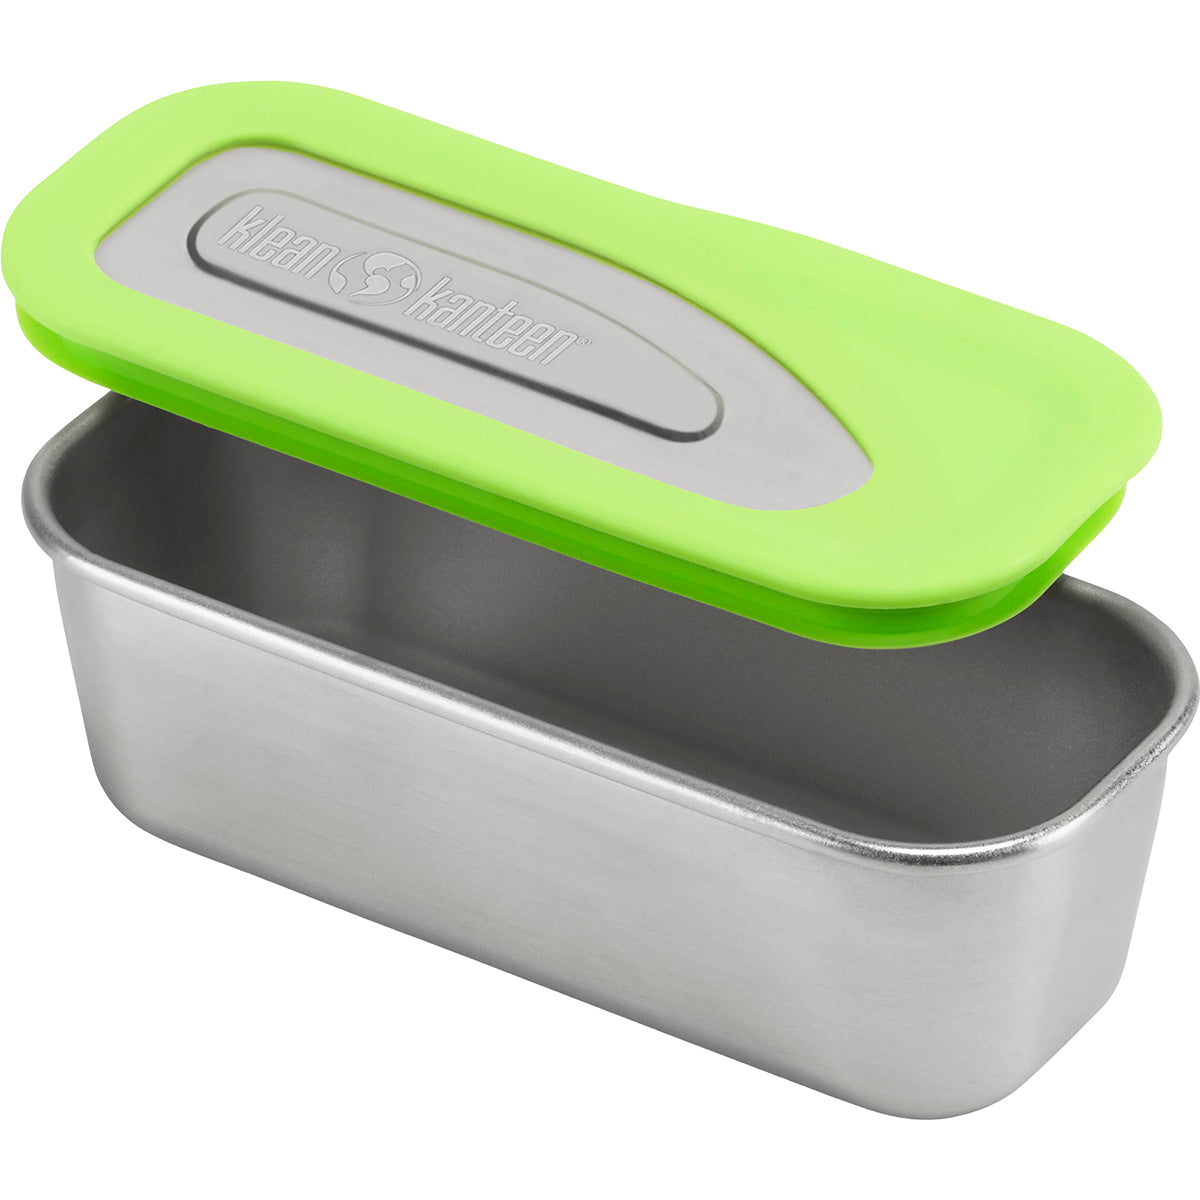 Klean Kanteen Stainless Steel Food Box with Silicone Lid - Complete Set Klean Kanteen